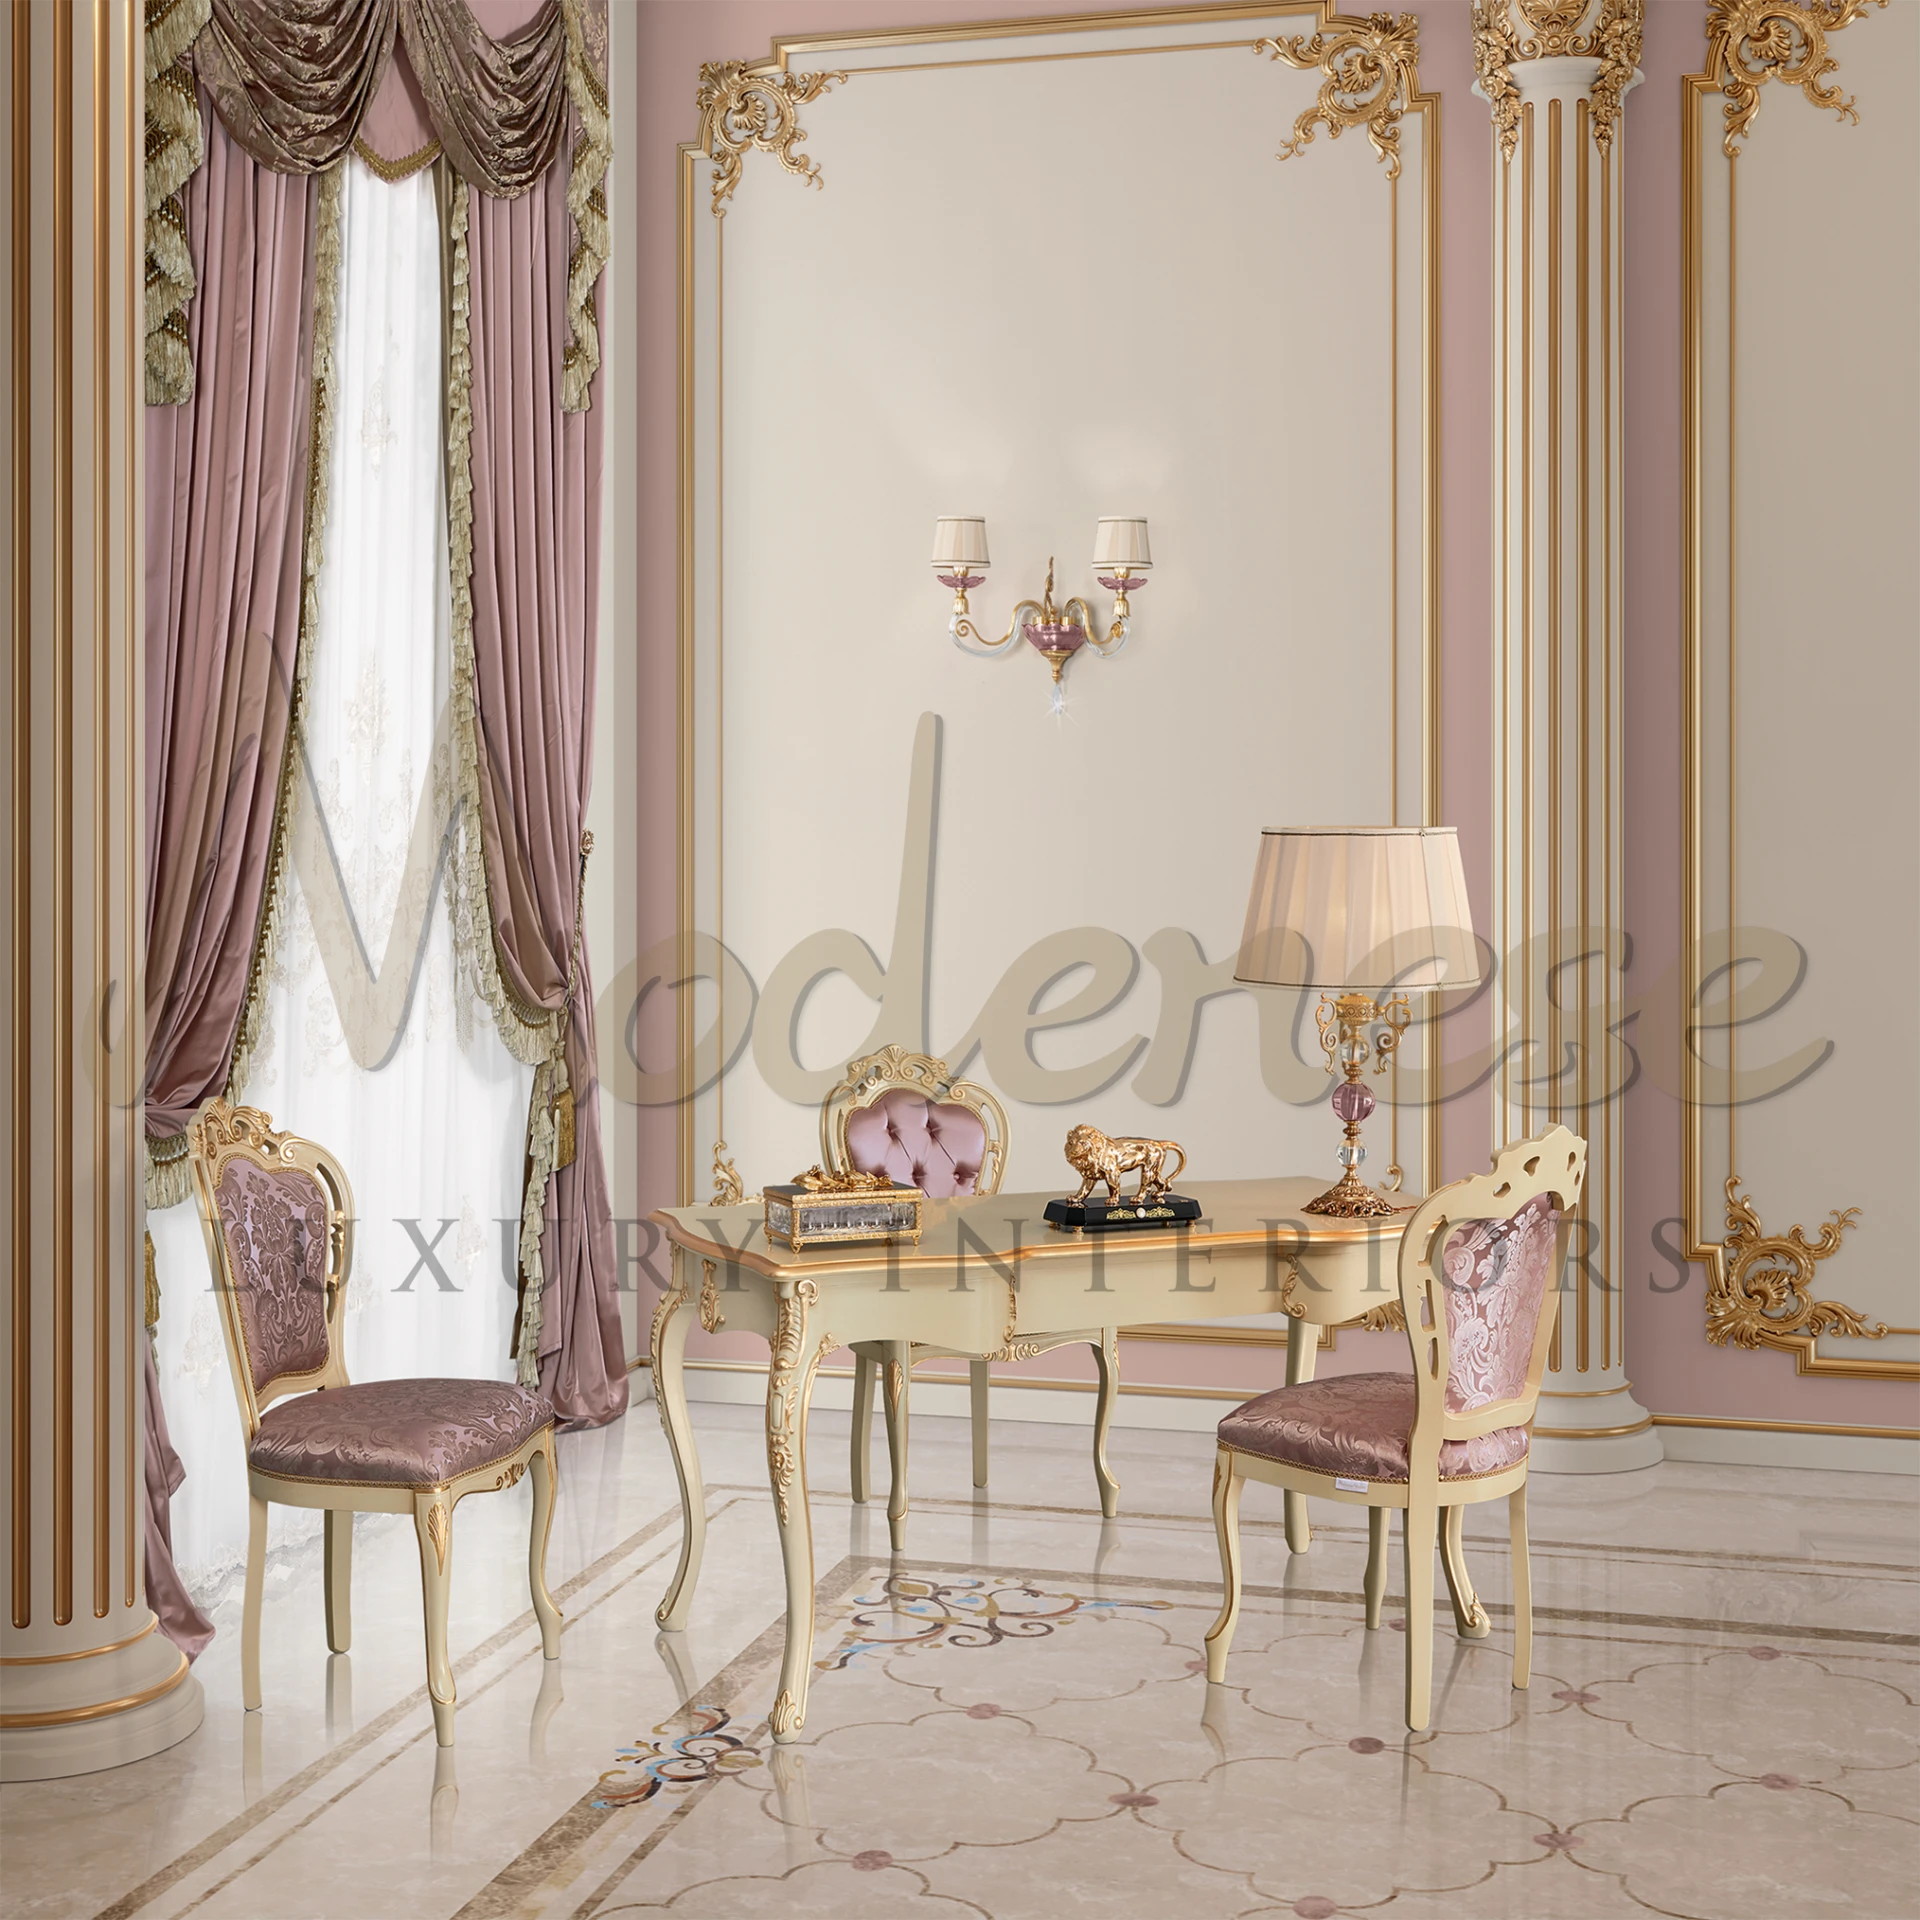 Modern fancy room with luxurious dining furniture and intricate design details.